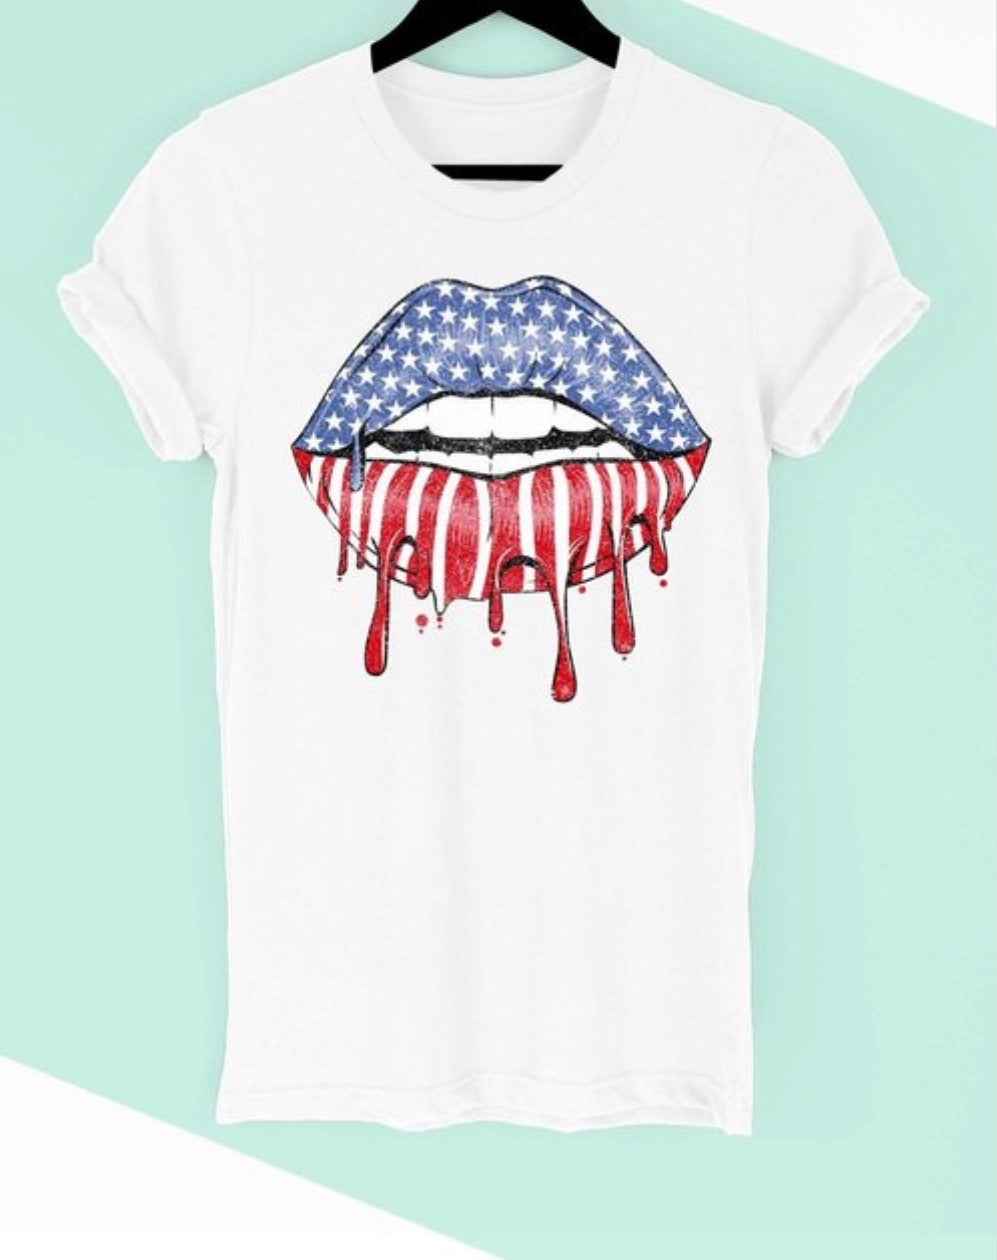 USA Graphic Lips T-Shirt - Corinne an Affordable Women's Clothing Boutique in the US USA